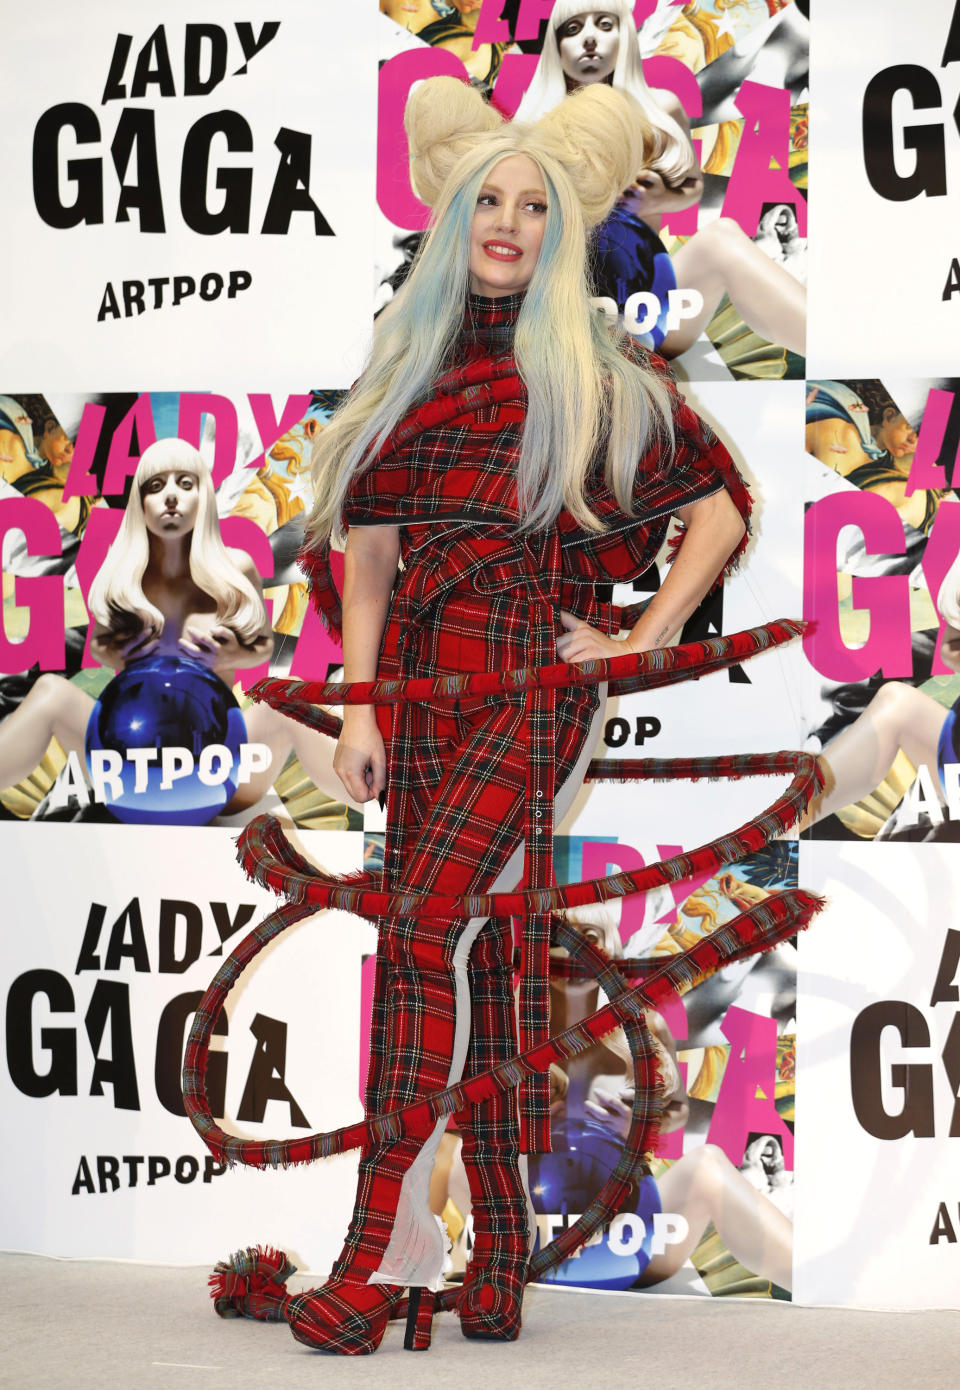 Lady Gaga poses for photographers during a press conference to promote her album "ARTPOP" in Tokyo, Sunday, Dec. 1, 2013. (AP Photo/Shizuo Kambayashi)